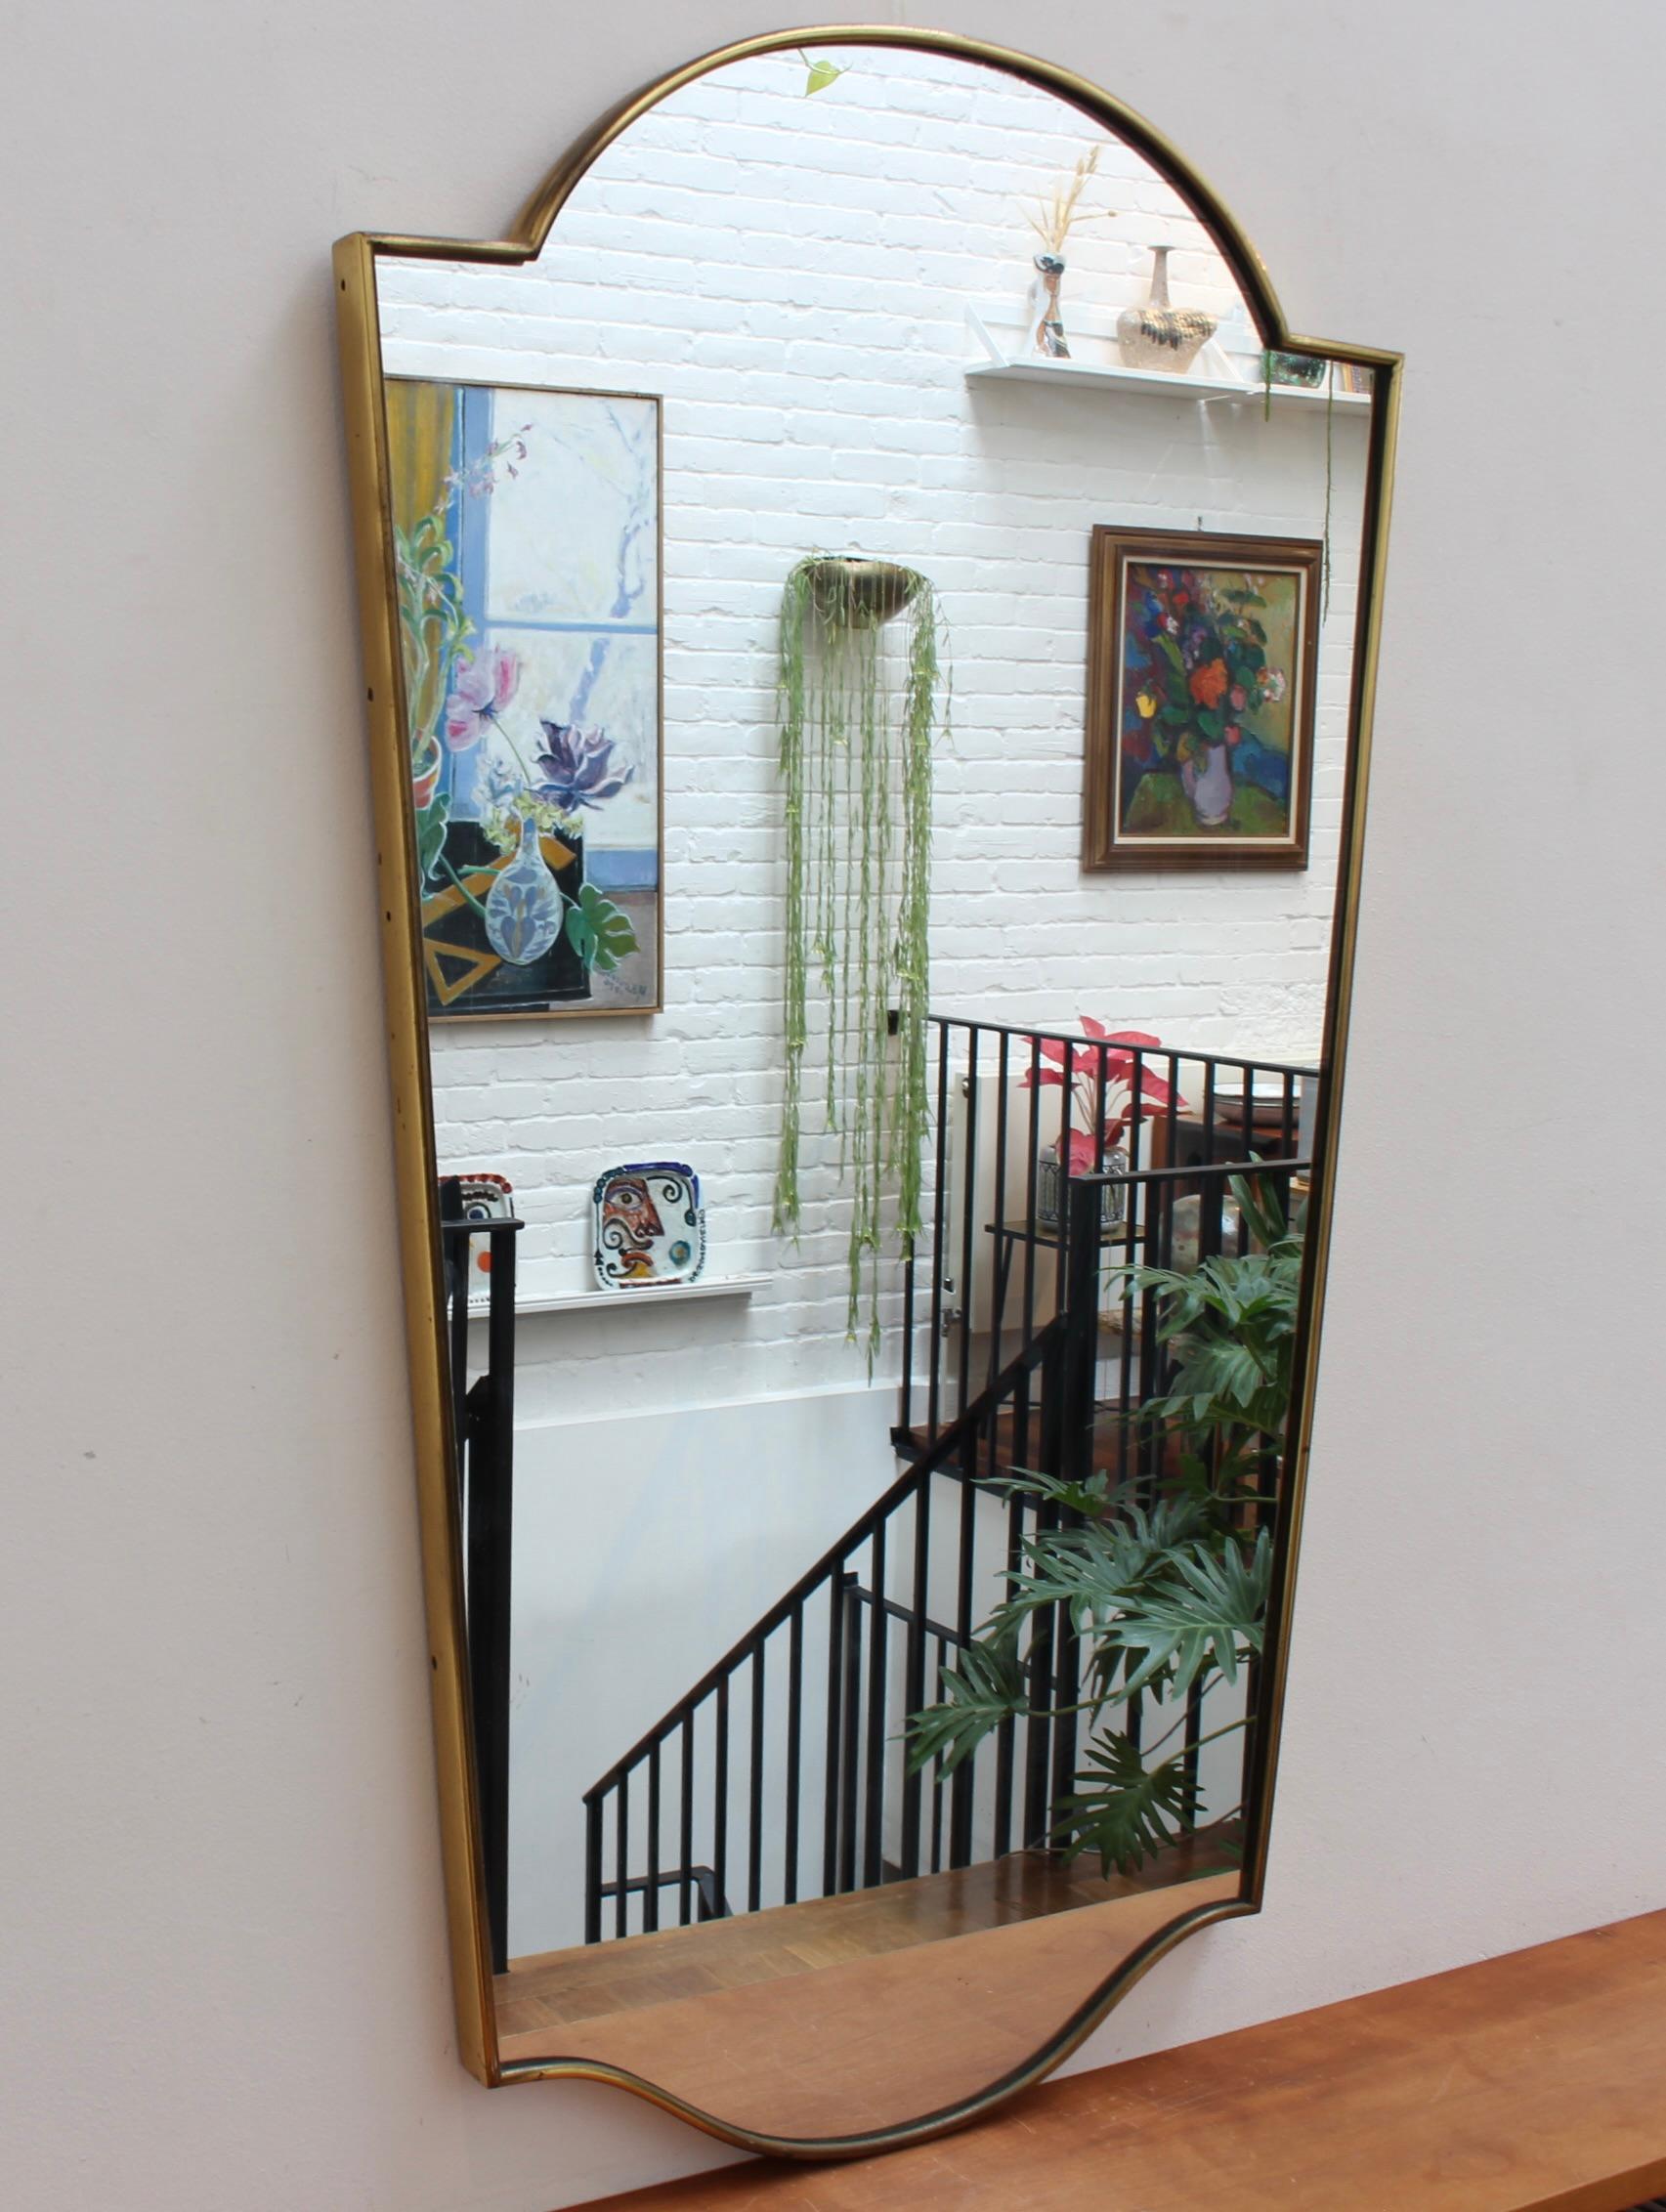 Mid-century Italian wall mirror with brass frame (circa 1950s). The mirror is classically-shaped and distinctive in a Modern style. It is in good overall condition considering the presence of a small malformation in the glass near the top (see